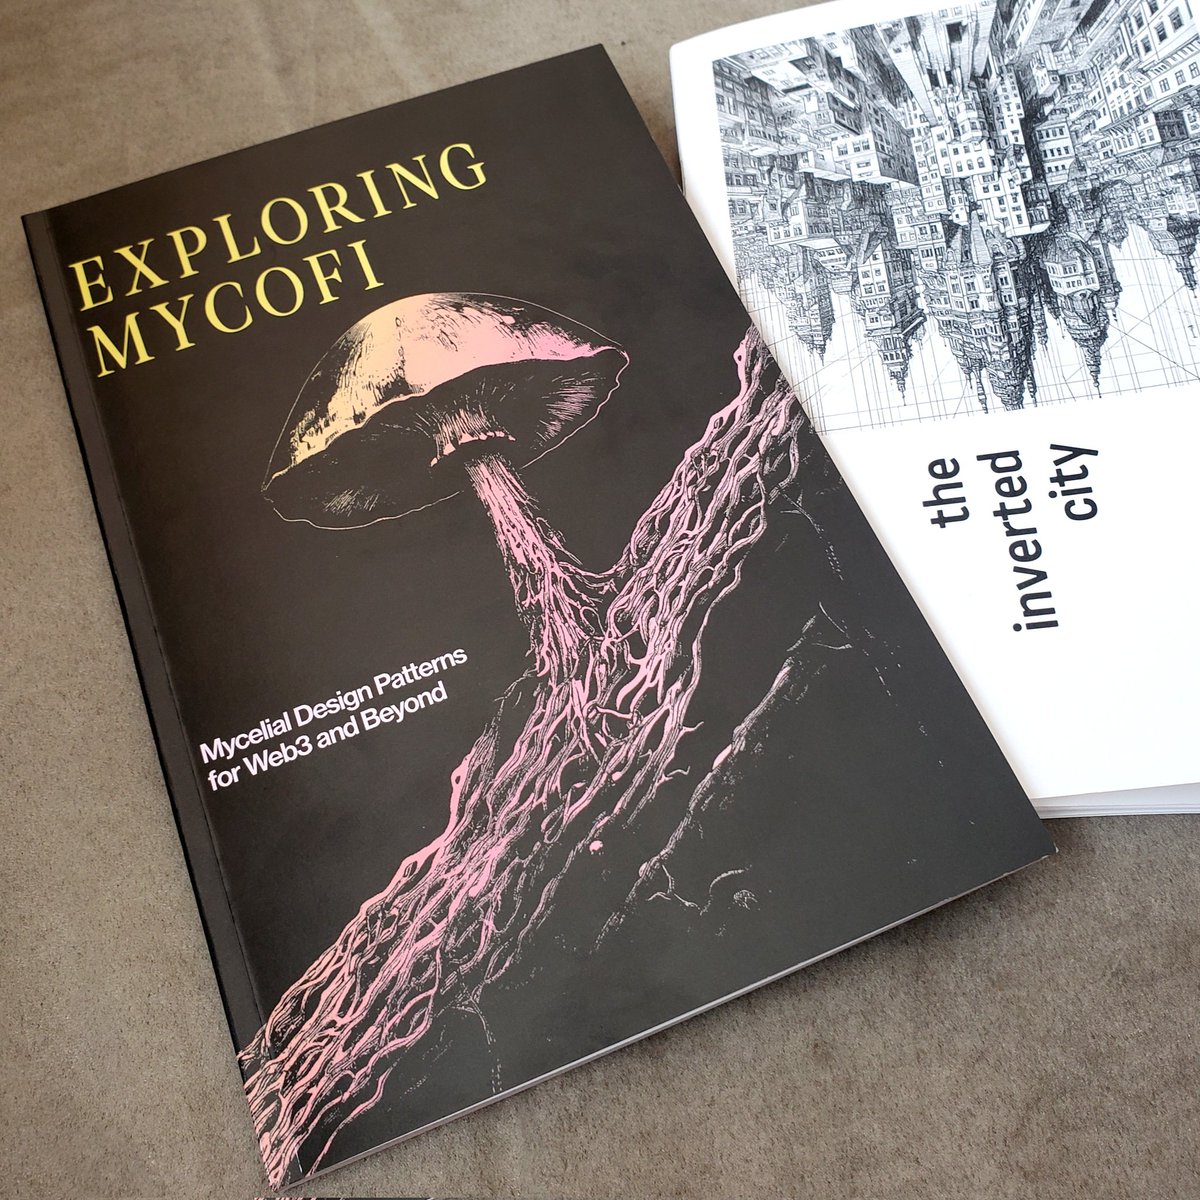 Think like a mushroom. Explore mycelial design patterns. Ask the question of the inverted city. Not much space for swag in my bag, but always making space for works of art by friends, both new and old. Yesterday was fun(gal). Feeling connected. #mycofi #biomimicry #localism